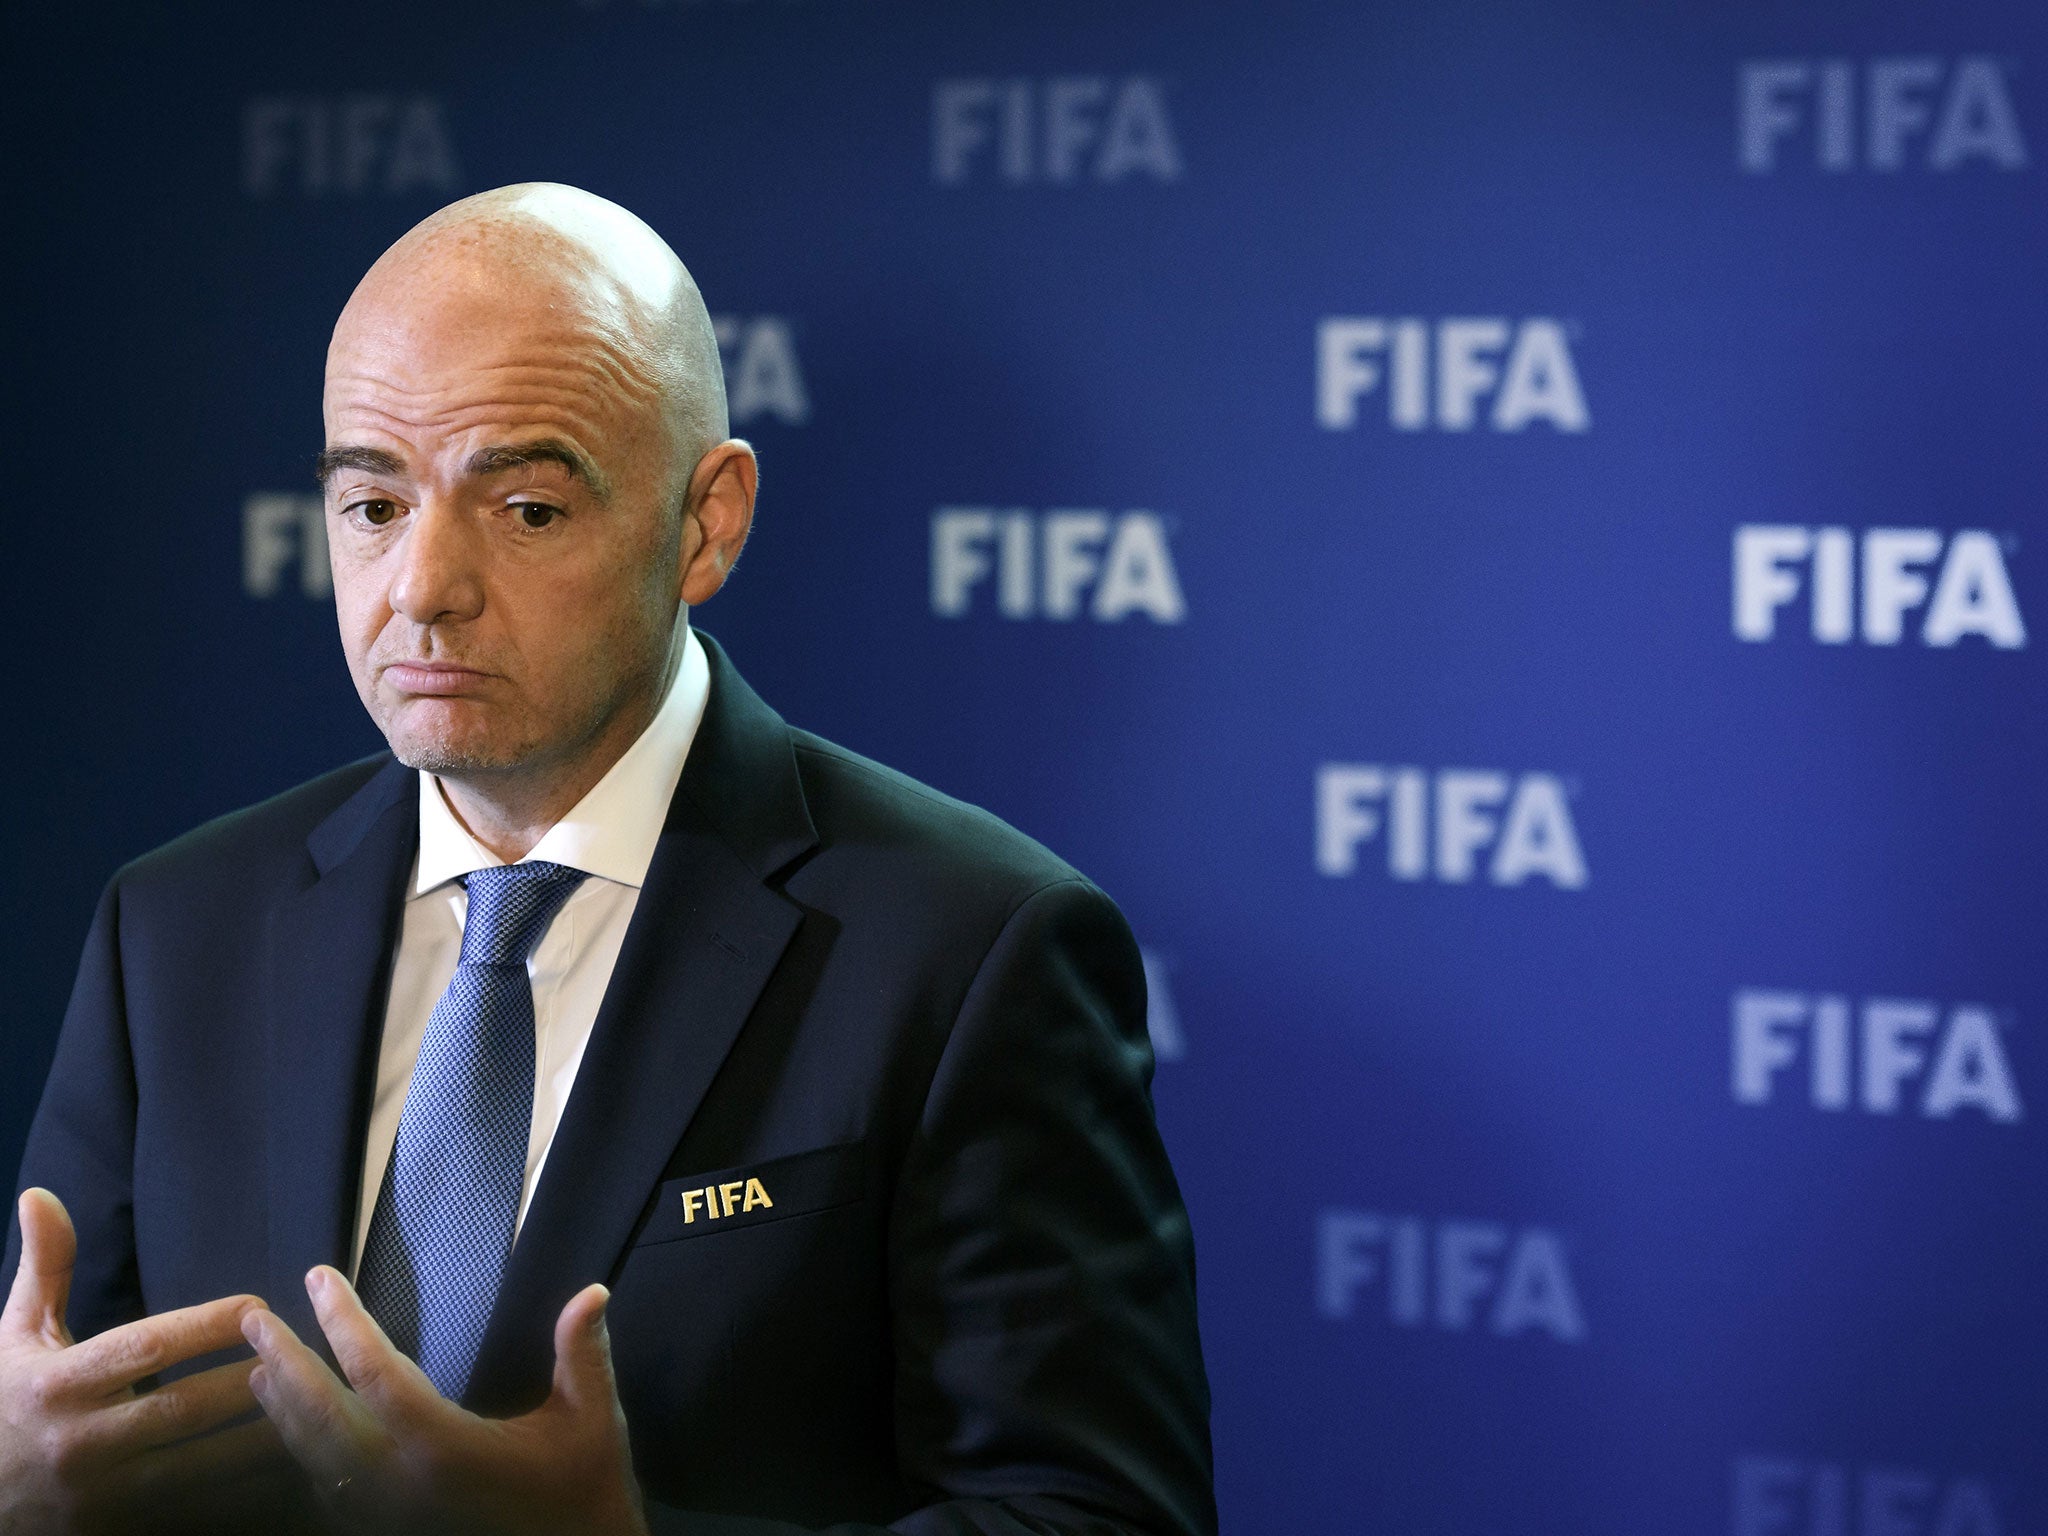 Fifa have expressed their contempt for the FA's defiance